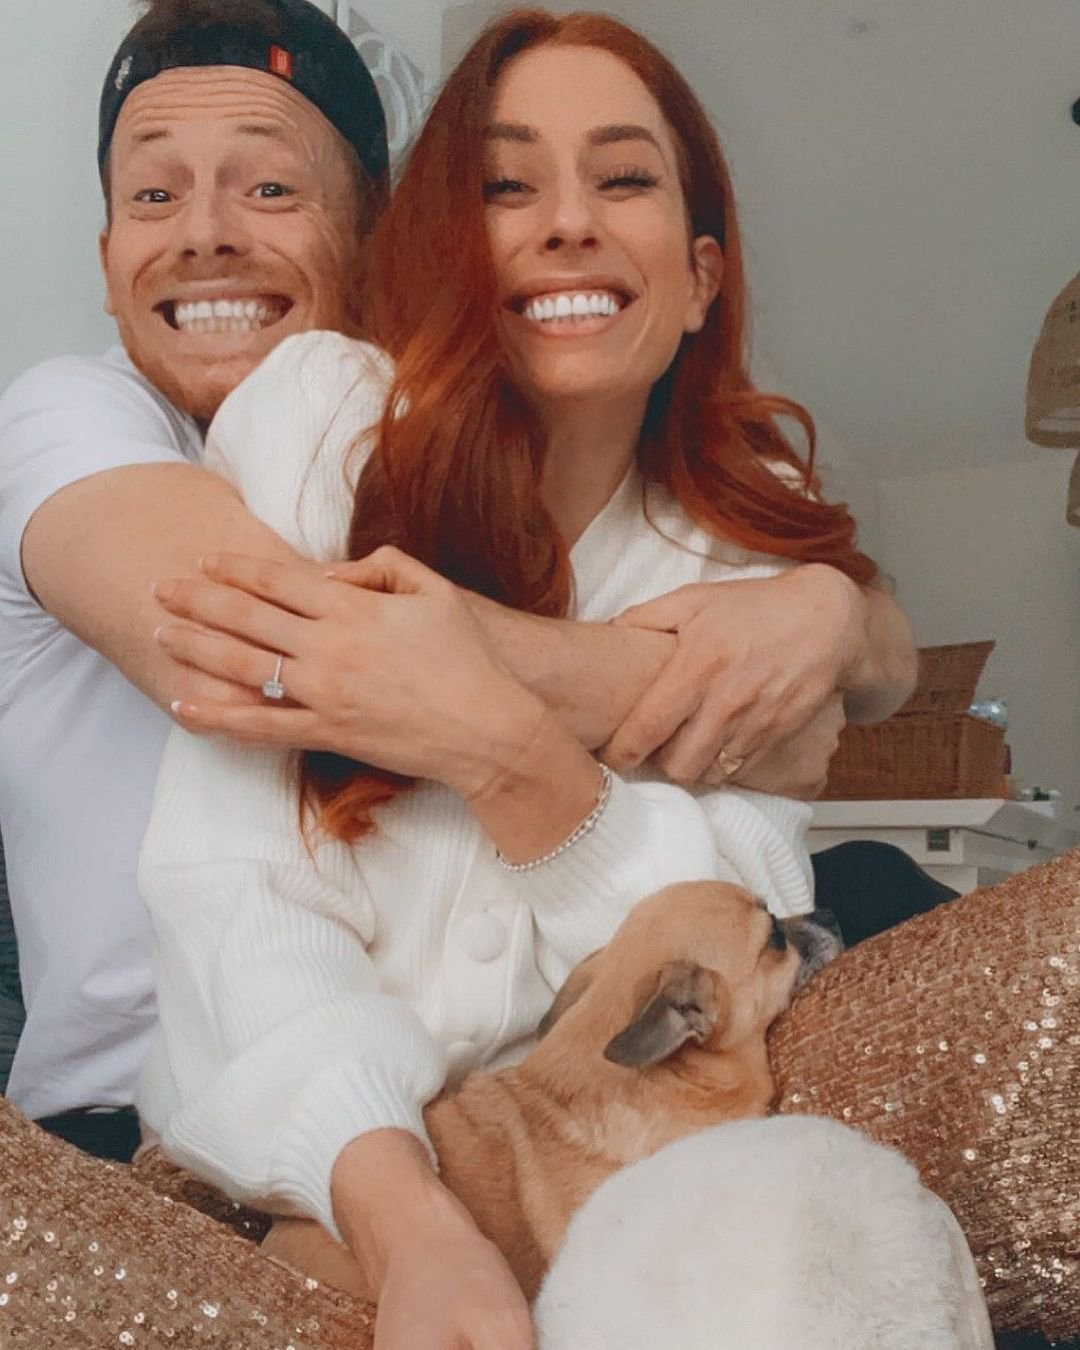 Stacey Solomon defends her kids having different dads and insists: ‘They’re best thing to happen to me’